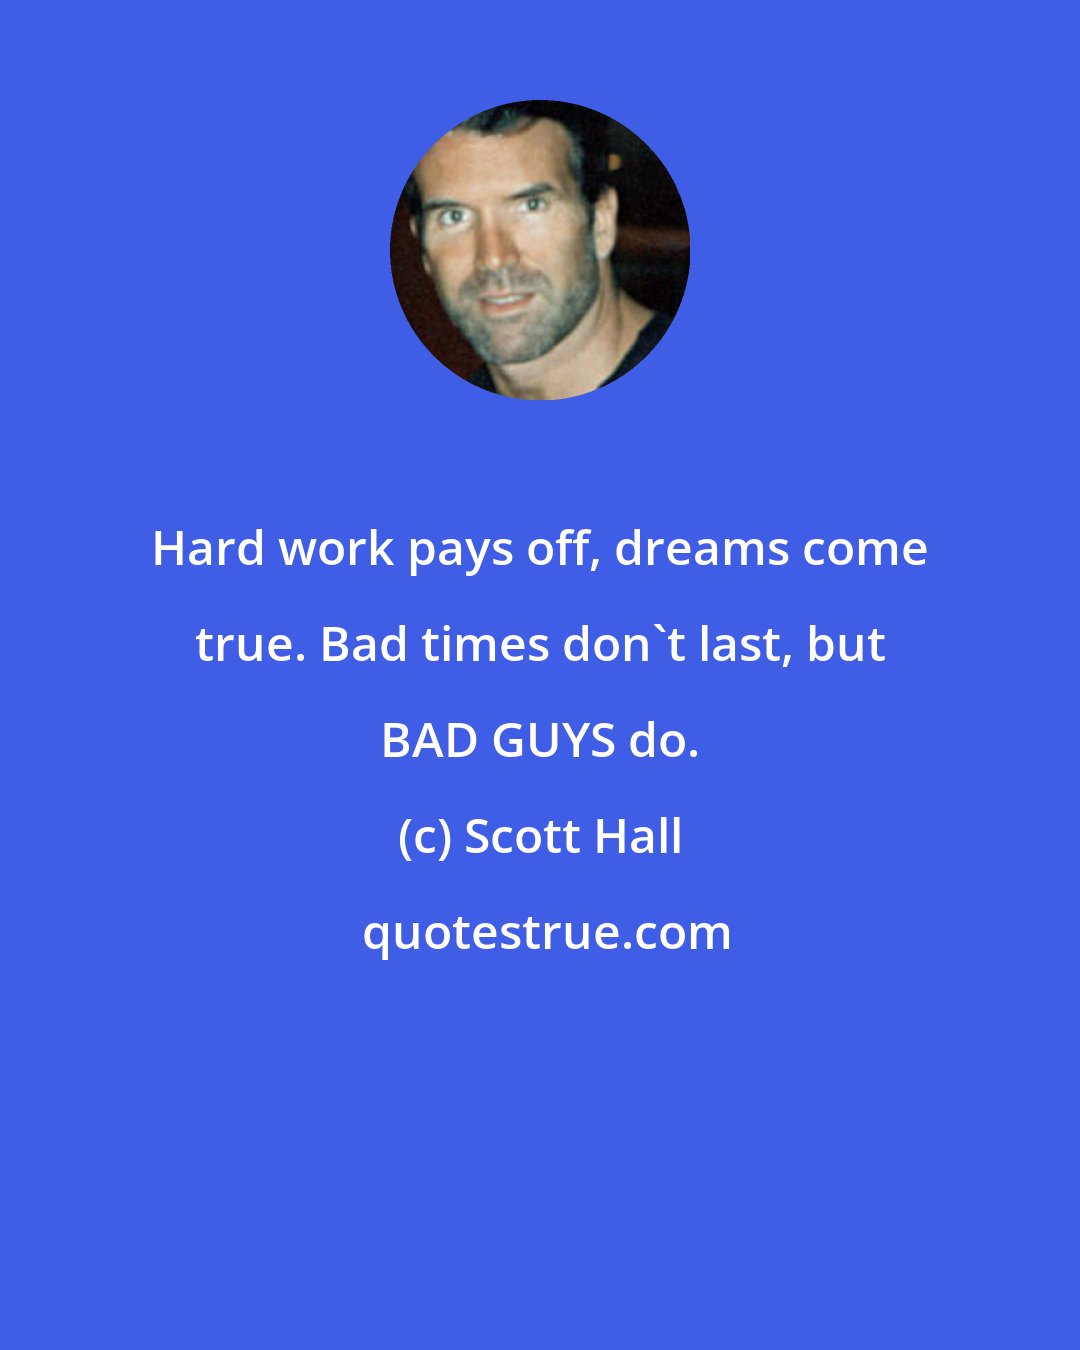 Scott Hall: Hard work pays off, dreams come true. Bad times don't last, but BAD GUYS do.